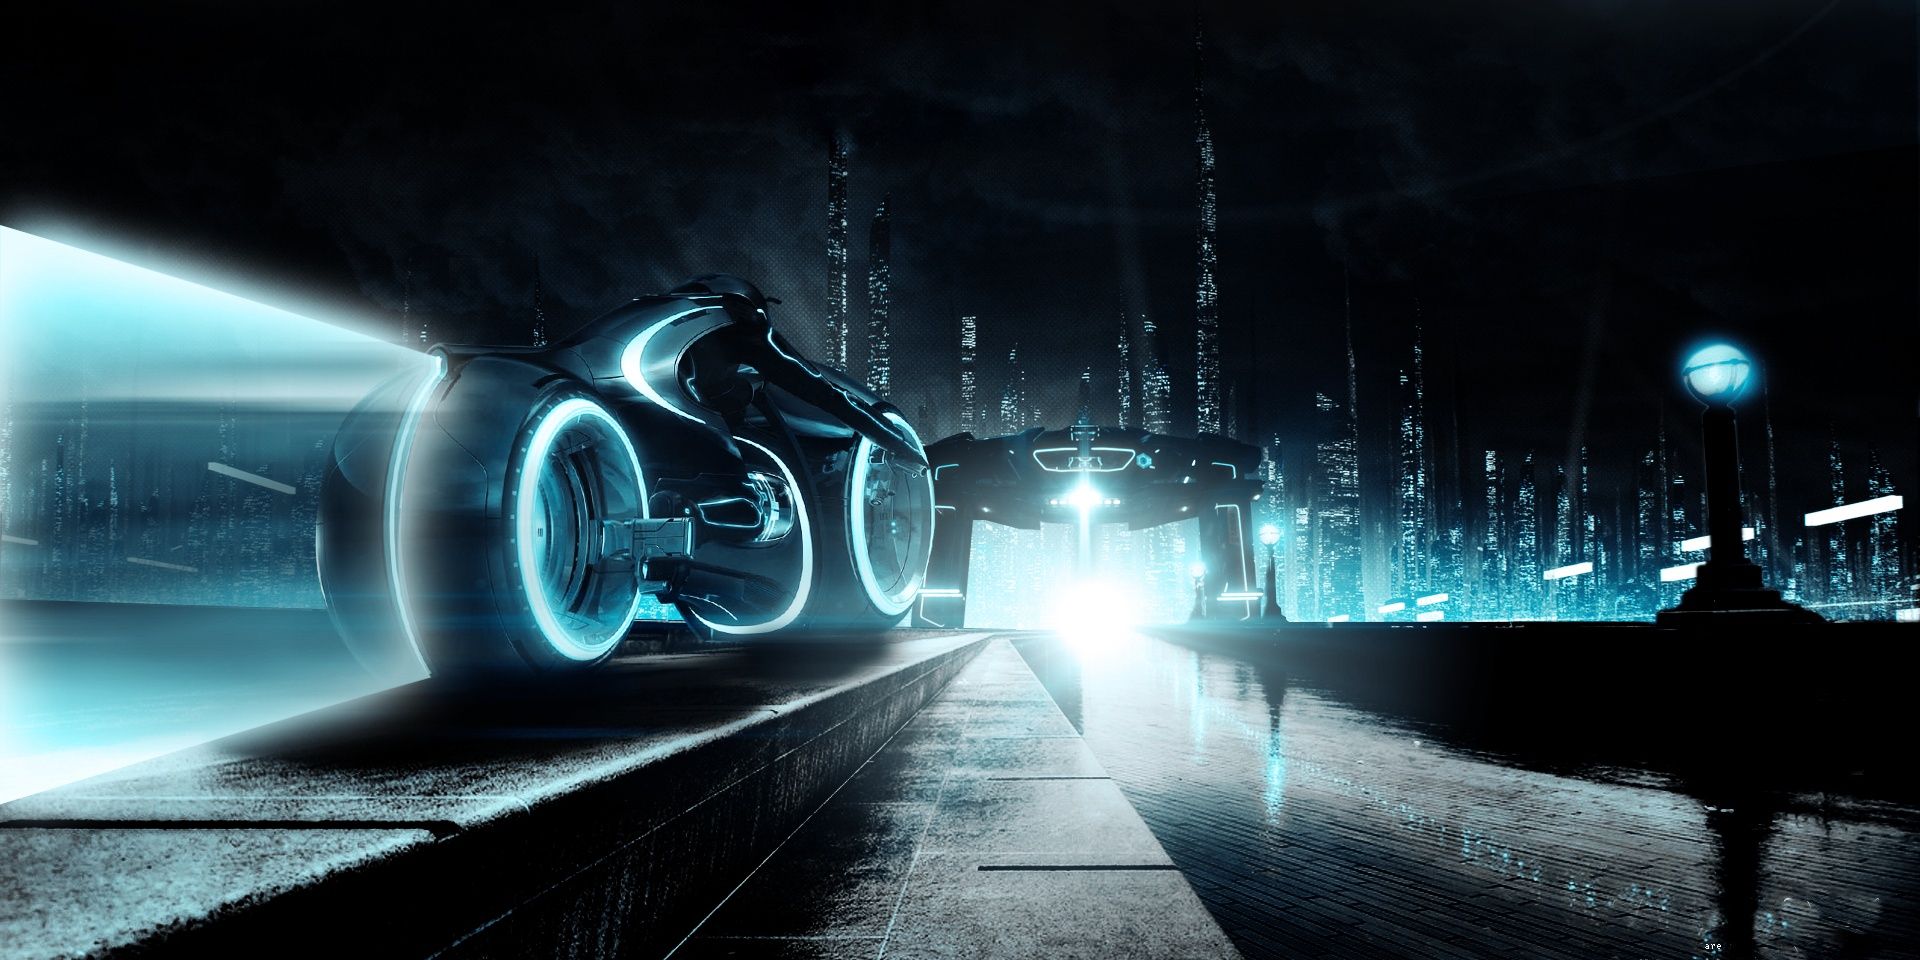 Light Cycles in Tron: Legacy